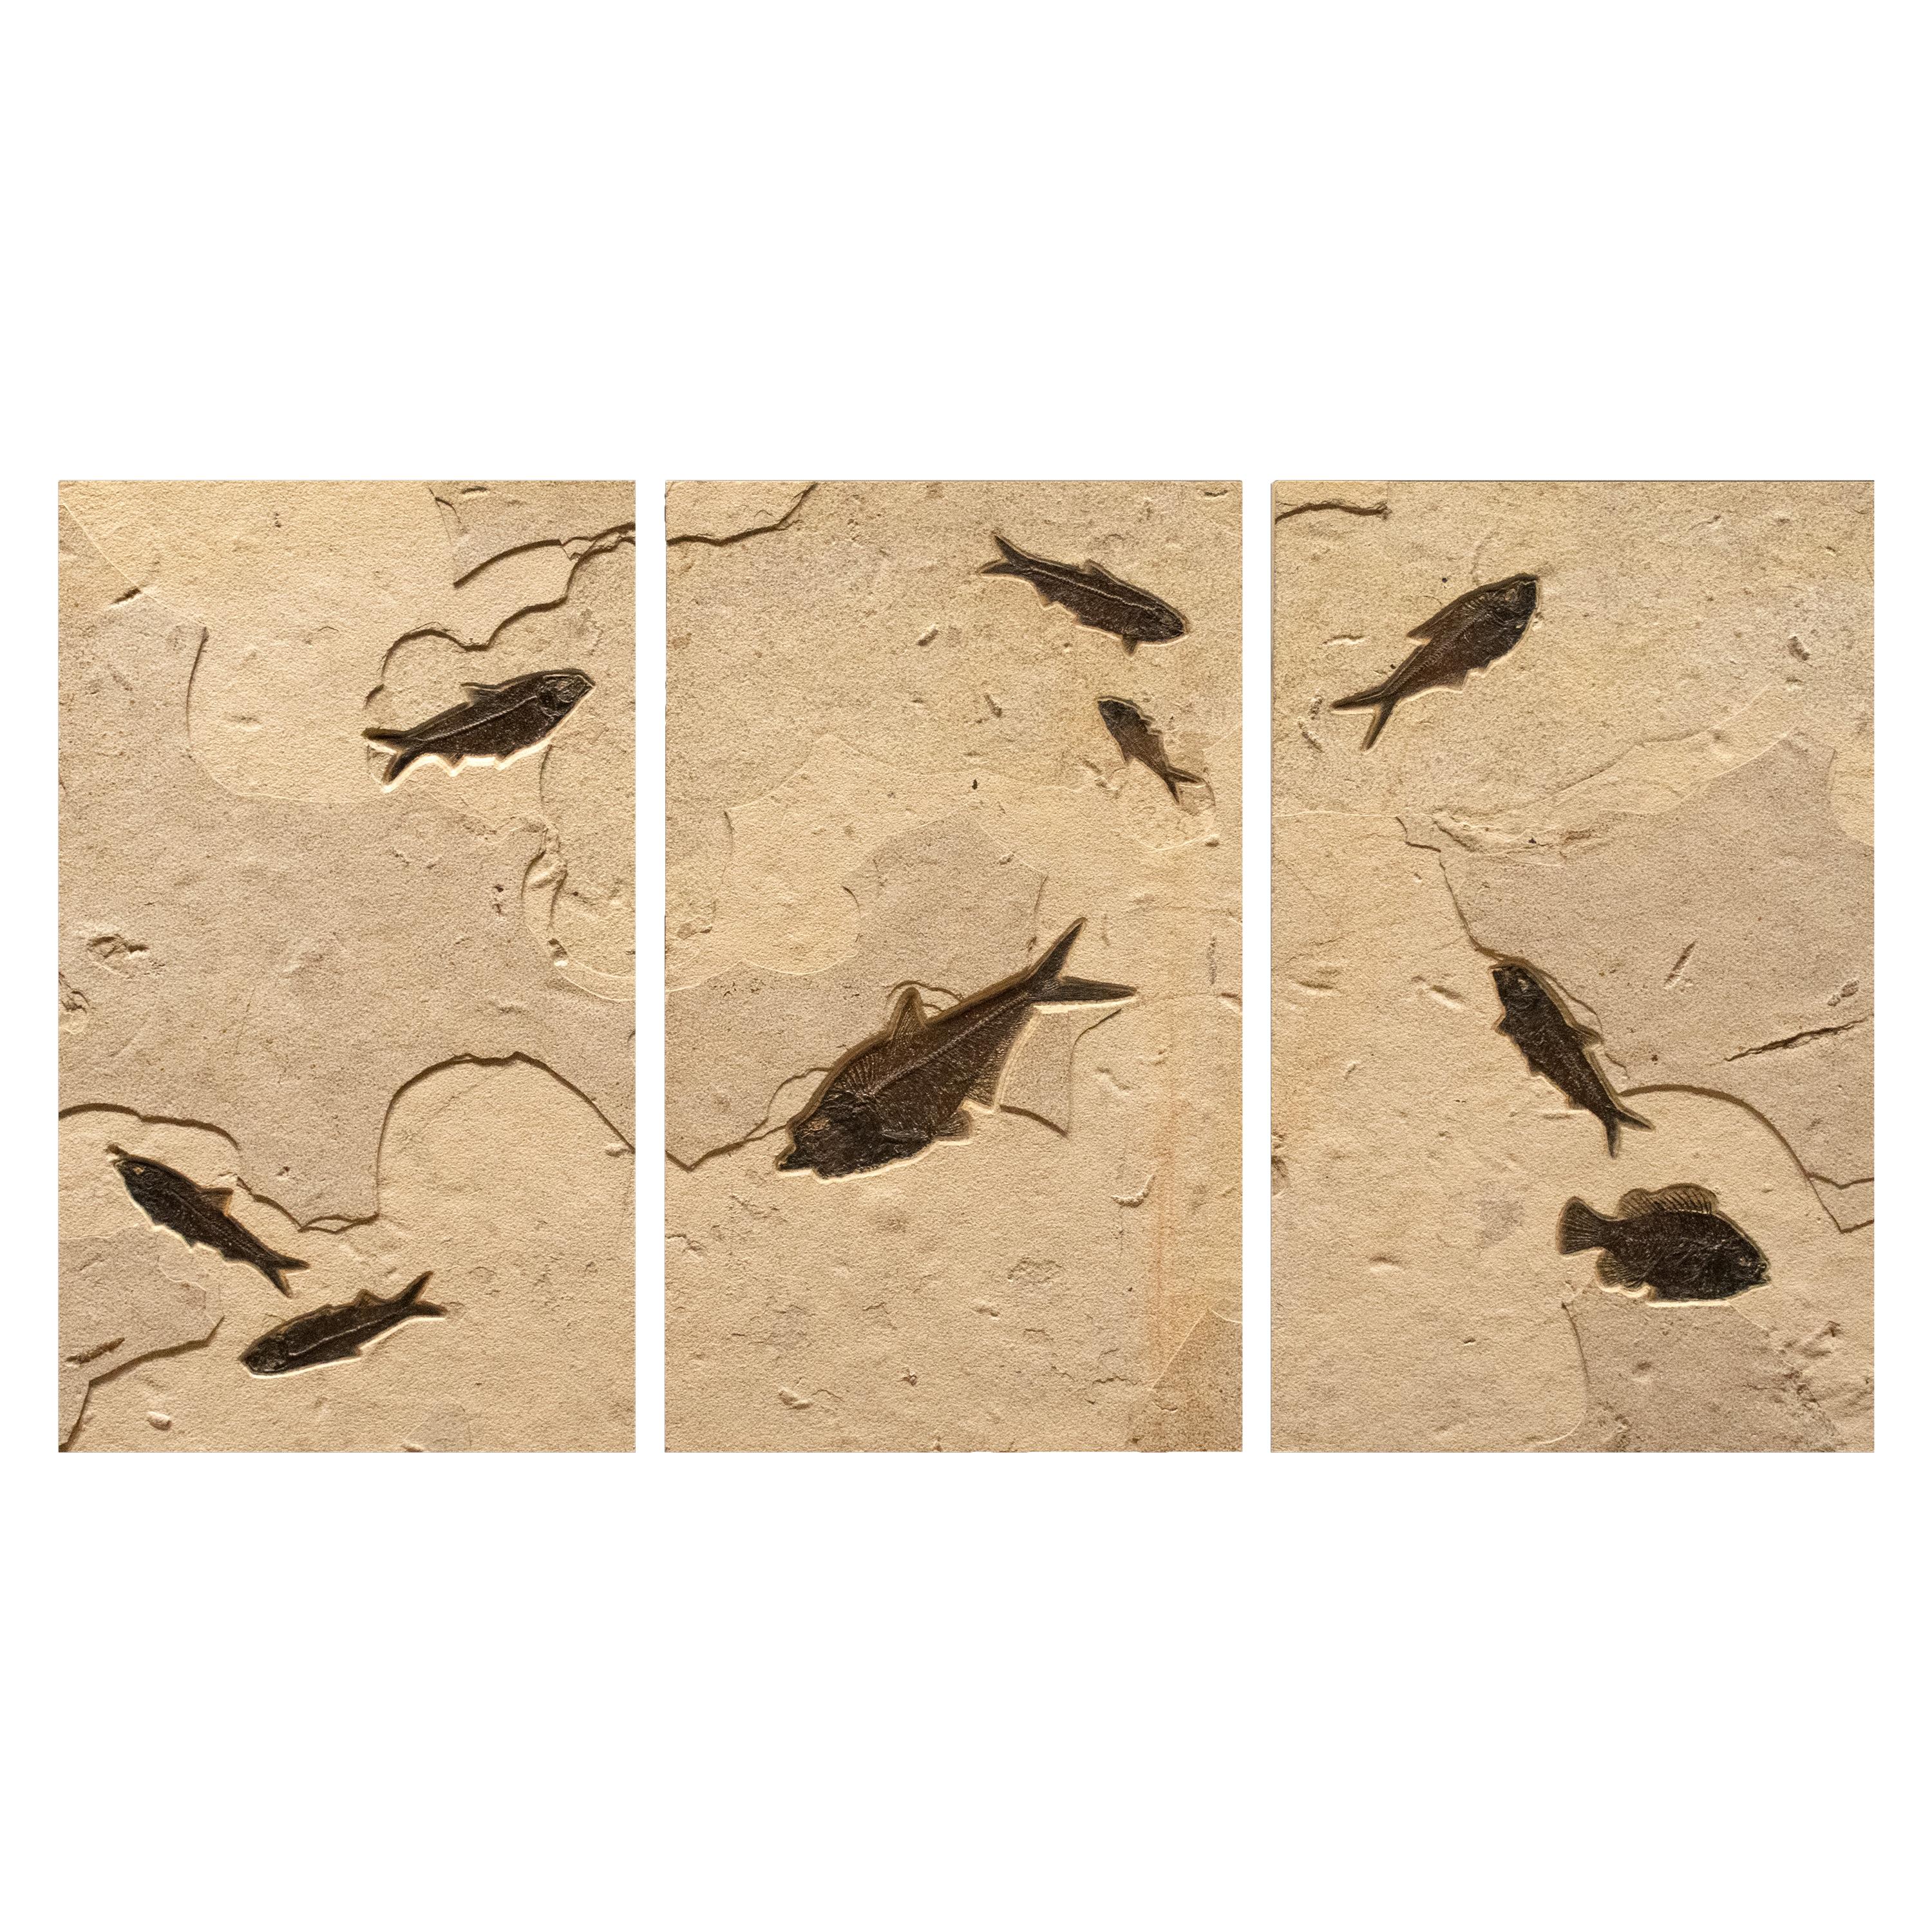 50 Million Year Old Fossil Fish Triptych from the Green River Formation, Wyoming